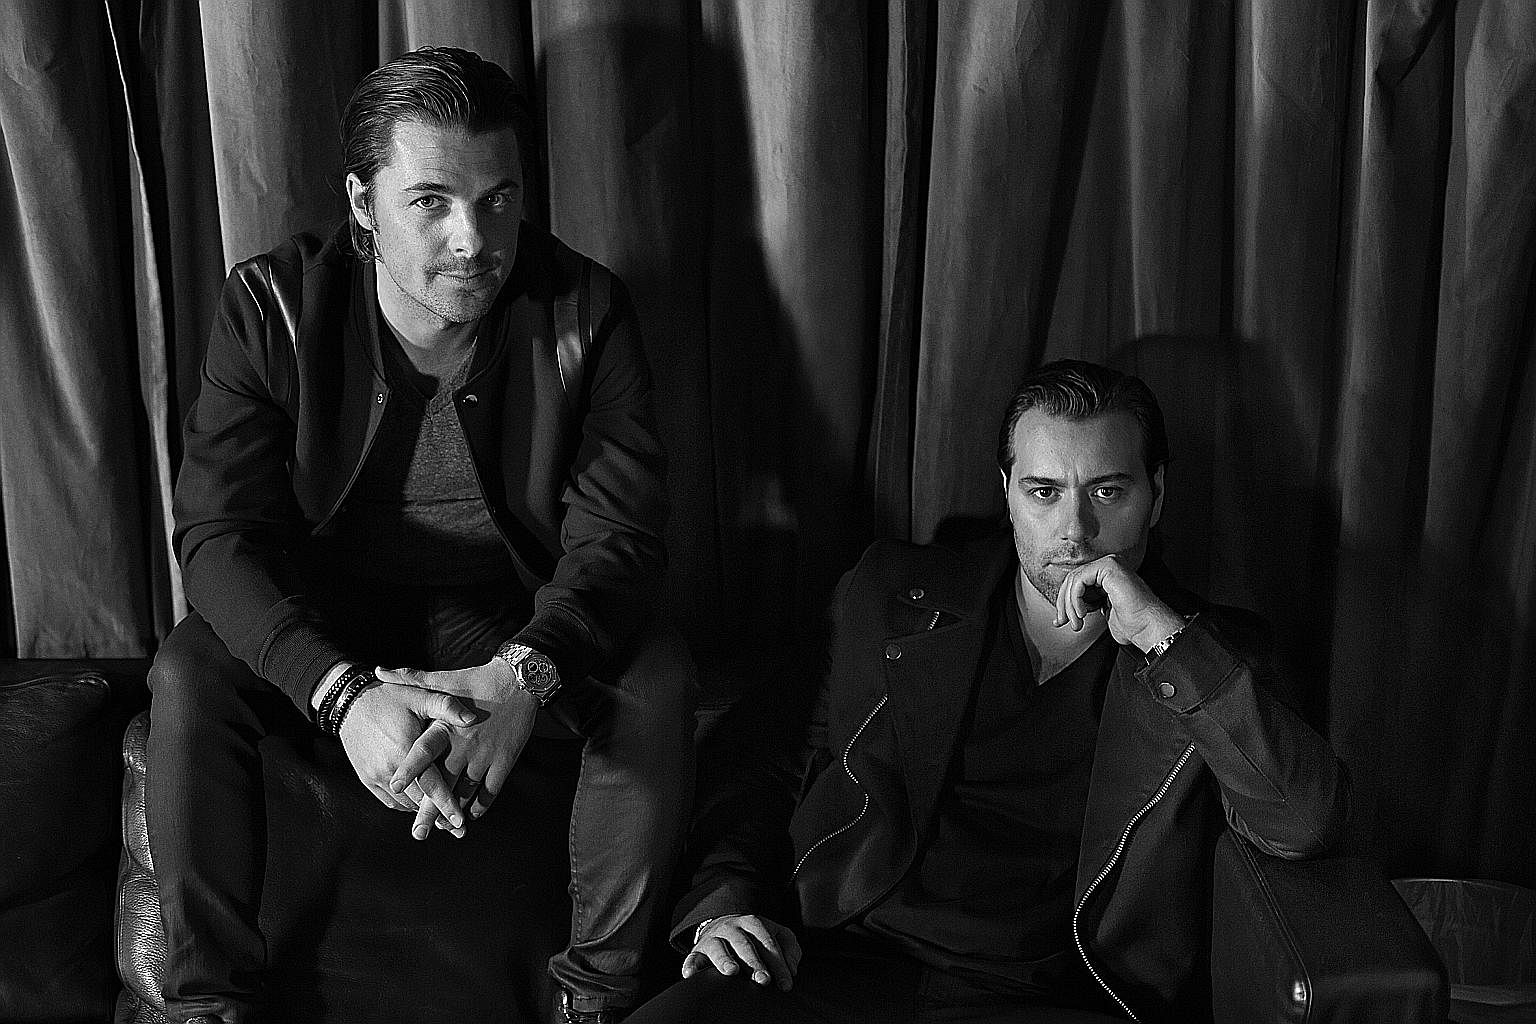 Swedish duo Axwell and Ingrosso played at ZoukOut 2015 and will be back this year.